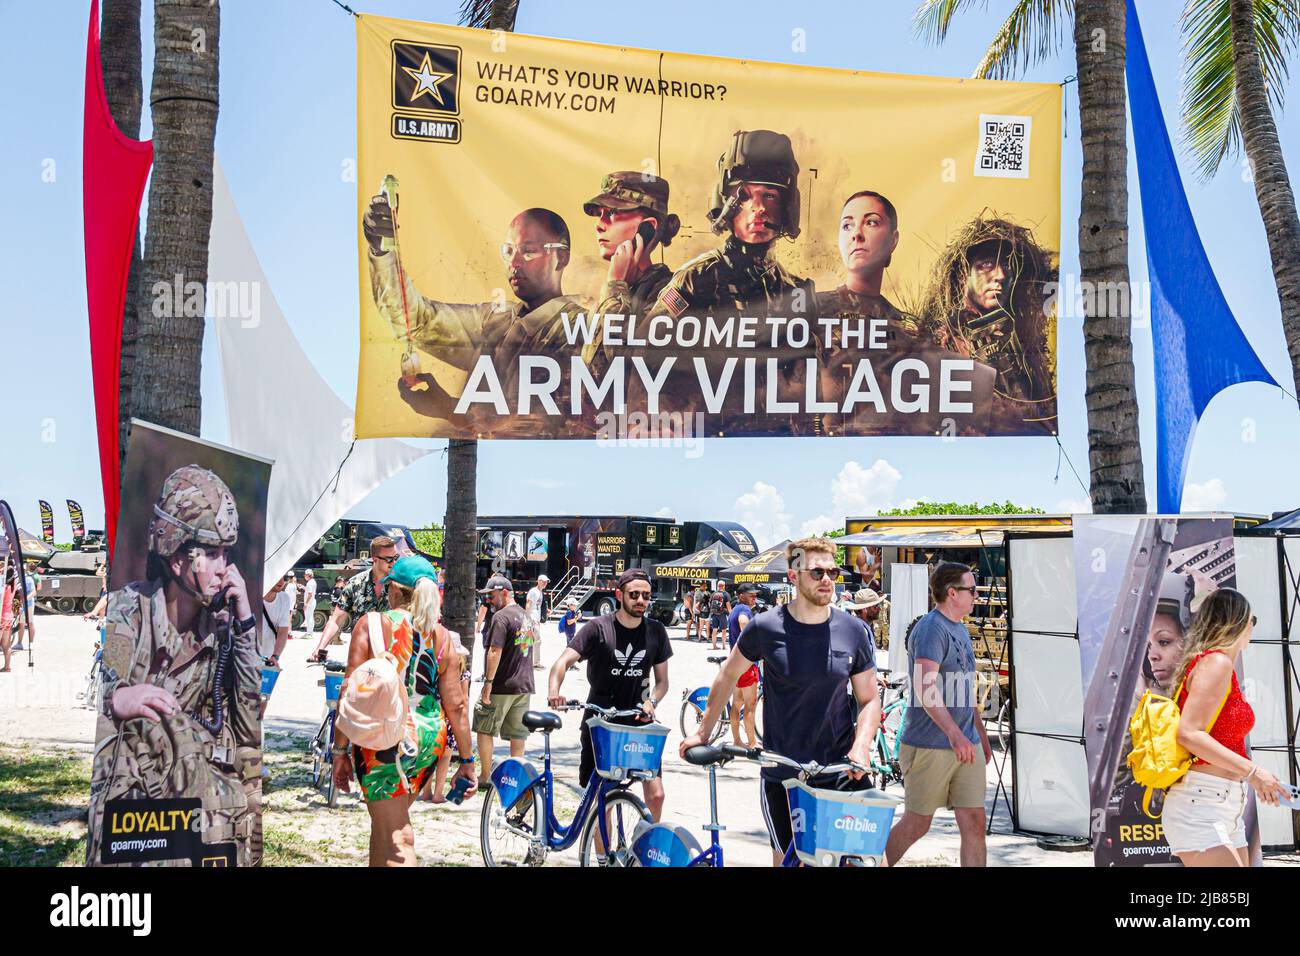 Miami Beach Florida,Hyundai Air & Sea Show Military Army Village vendor vendors,exhibitor exhibitors stall stalls booth booths armed forces recruiting Stock Photo